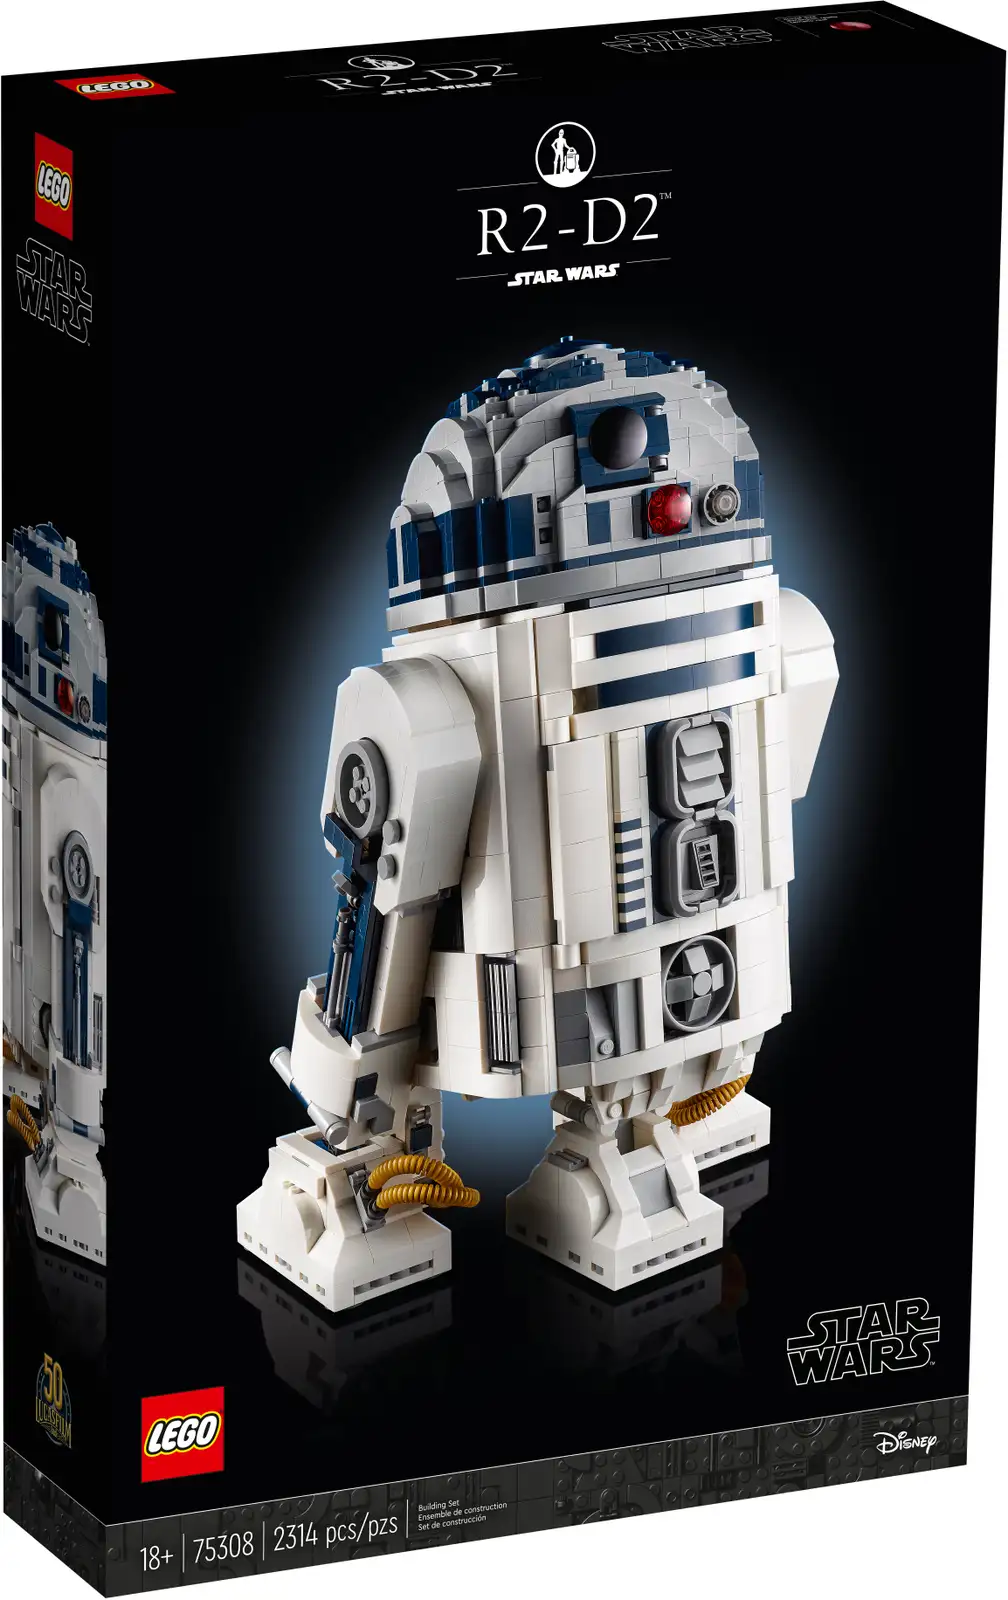 Relive classic Star Wars™ moments as you build this exceptionally detailed R2-D2 LEGO® droid figure. The brilliant new-for-May-2021 design is packed with authentic details, including a retractable mid-leg, rotating head, opening and extendable front hatches, a periscope that can be pulled up and turned, and Luke Skywalker’s lightsaber hidden in a compartment in the head. Build and display This cool construction model comes with a buildable display stand, featuring an information plaque, R2-D2 LEGO droid figure and an exclusive Lucasfilm 50th anniversary LEGO brick, to complete an awesome centerpiece for your home or workplace. Special gift Part of a premium-quality collection of LEGO Star Wars building kits for adults, this set would make a wonderful gift for yourself, Star Wars fans and advanced LEGO builders. Build and display this fantastically detailed, new-for-May-2021, LEGO® brick model of an iconic character from the Star Wars™ saga: R2-D2 (75308). Authentic features include a retractable mid-leg, rotating head, opening and extendable front hatches and adjustable periscope, plus a lightsaber hidden in a compartment in the head. Includes a buildable display stand with an information plaque, LEGO® Star Wars™ R2-D2 LEGO droid figure and a special Lucasfilm 50th anniversary LEGO brick. This premium-quality set is part of a series of collectible LEGO® Star Wars™ build-to-display models. Offering a challenging and rewarding build, this 2,315-piece set makes an awesome birthday present, holiday gift or surprise treat for any Star Wars™ connoisseur and LEGO® Star Wars lover. Measuring over 12.5 in. (31 cm) high, 7.5 in. (20 cm) wide and 6 in. (15 cm) deep, this collectible, brick-built R2-D2 model makes an impressive centerpiece in a home or workplace. Thinking of buying this set for a Star Wars™ memorabilia collector who is new to LEGO® building? Don’t worry. It comes with clear instructions so they can tackle this complex build with confidence. Collectible LEGO® Star Wars™ sets for adults are designed for discerning hobbyists who enjoy DIY projects to disconnect from their day-to-day lives in a mindful, creative and fun way. LEGO® components meet rigorous industry standards to ensure compatibility and a simple, secure connection every time. LEGO® bricks and pieces are tested in almost every way imaginable to make sure that they satisfy stringent global safety standards.